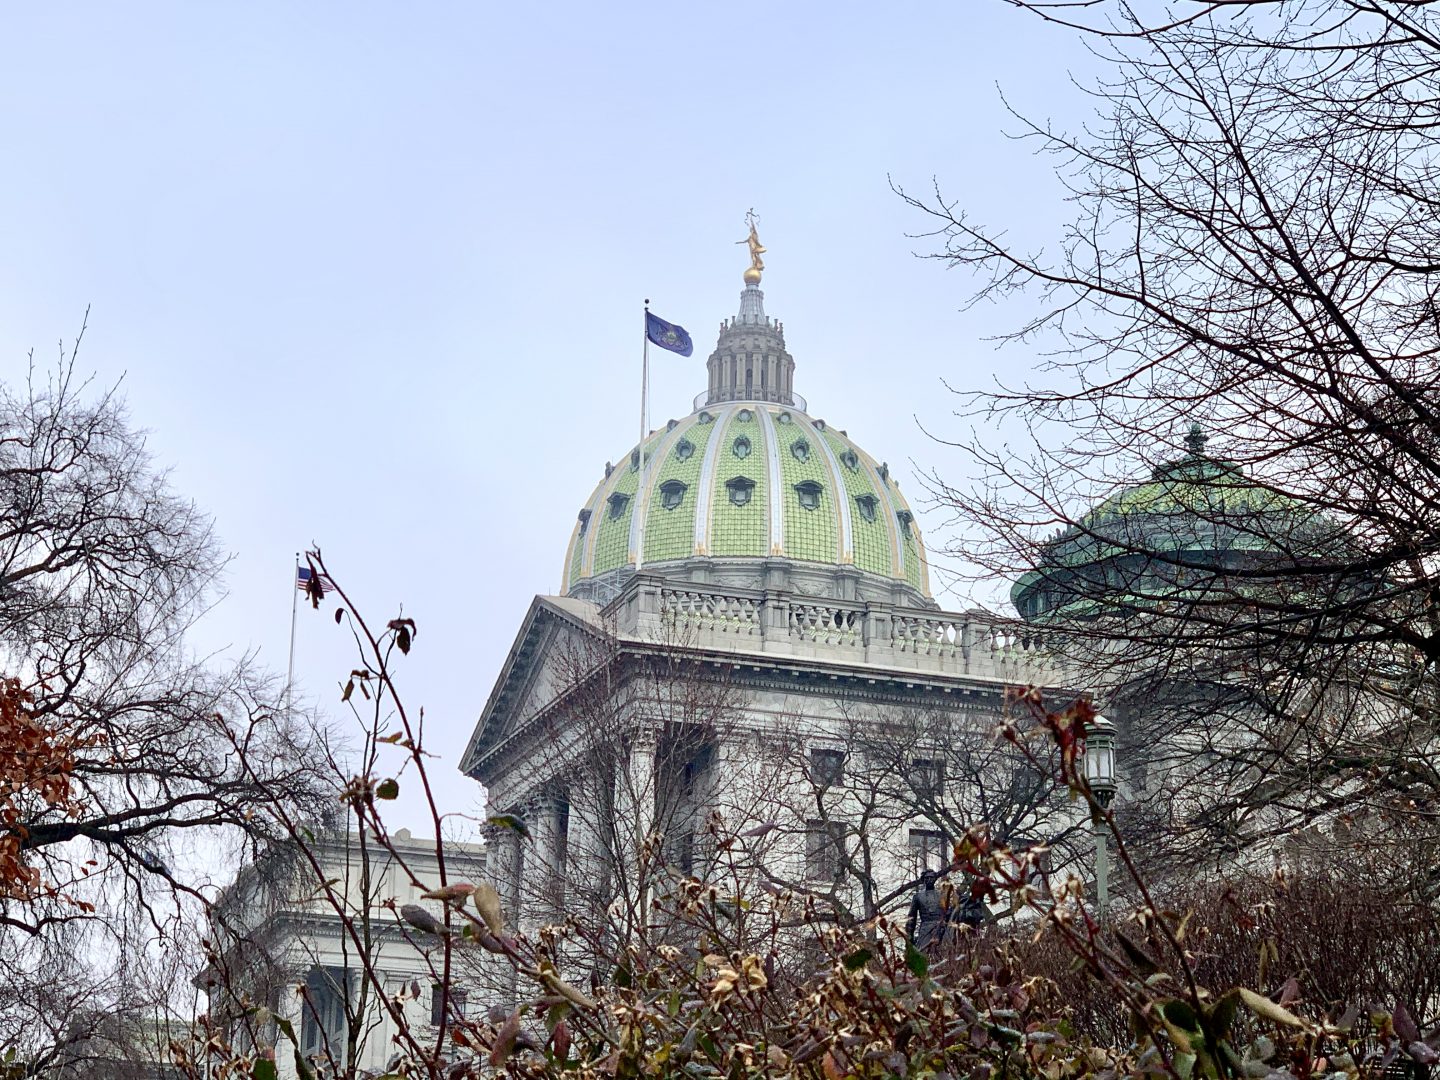 The Capitol in Harrisburg, Pa., on Wednesday, Jan. 15, 2020.